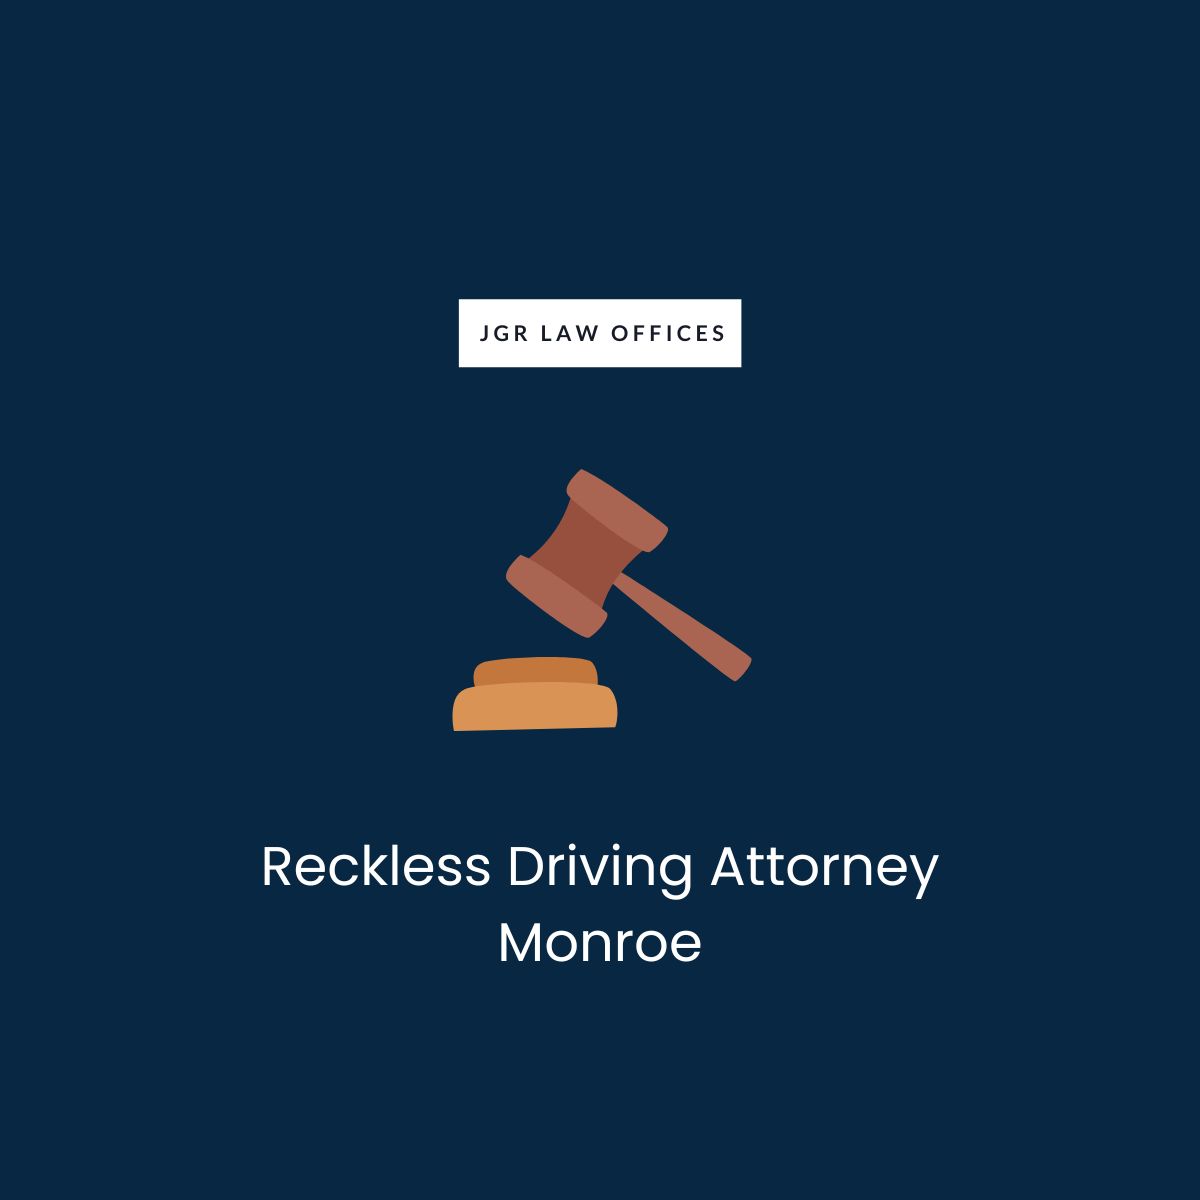 Reckless Driving Attorney Monroe